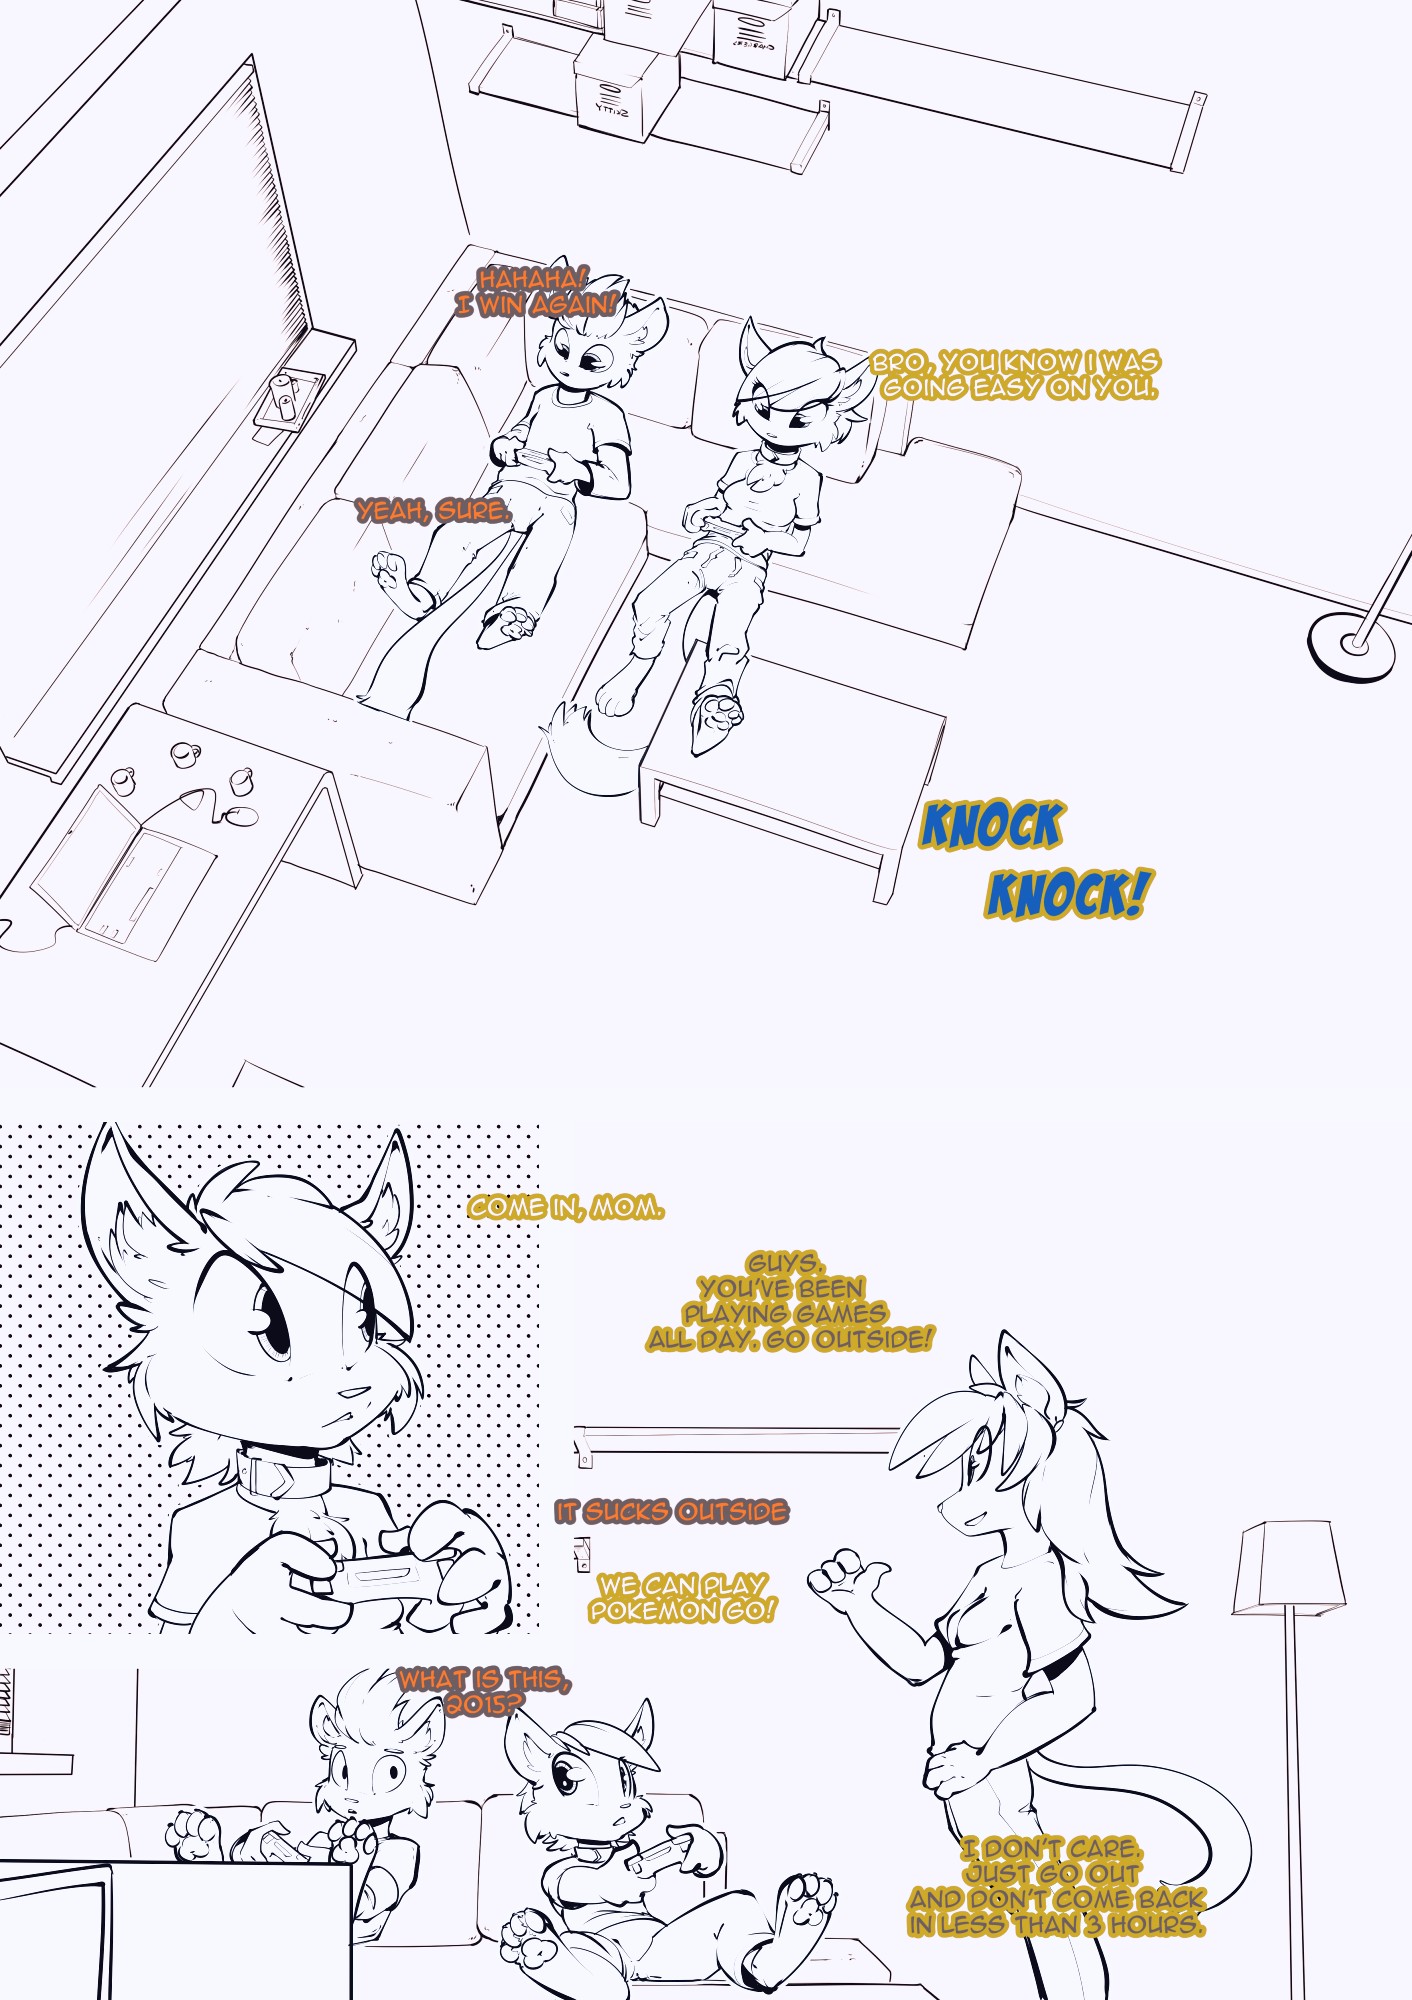 An Accident in the Park furry porn comic page 01